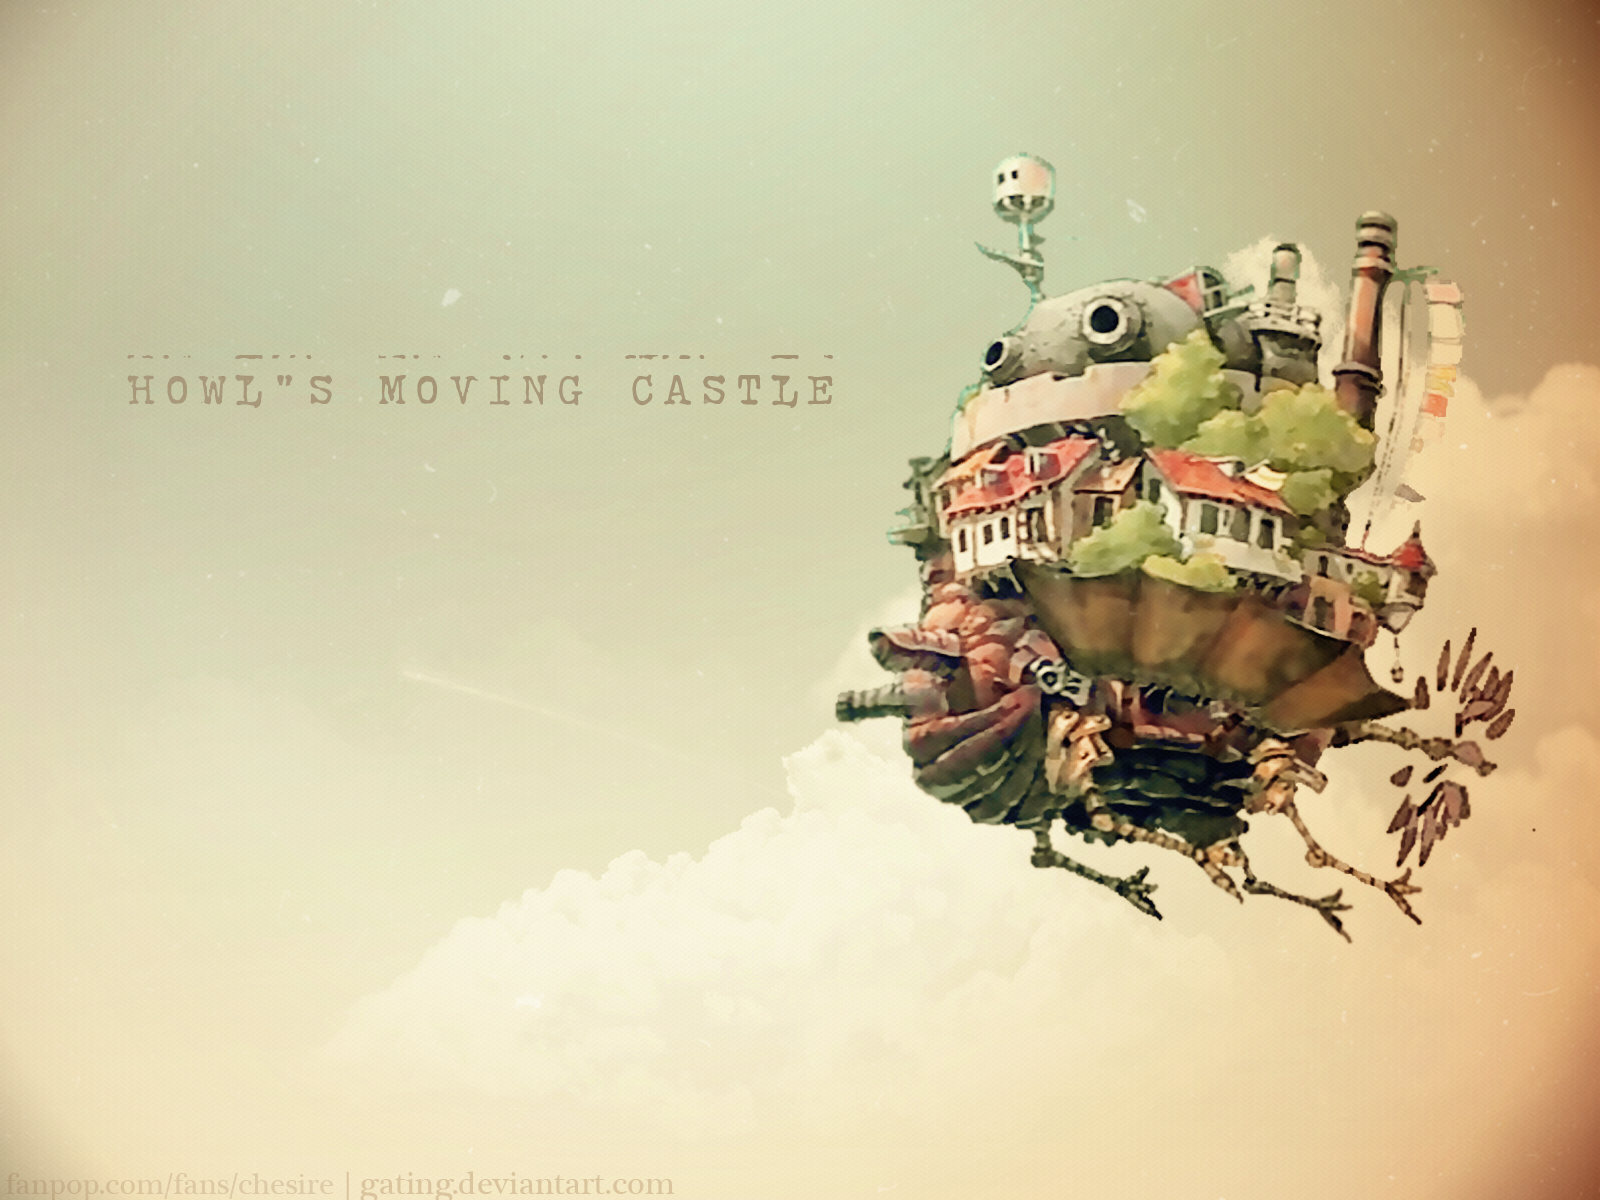 Howls Moving Castle Wallpapers